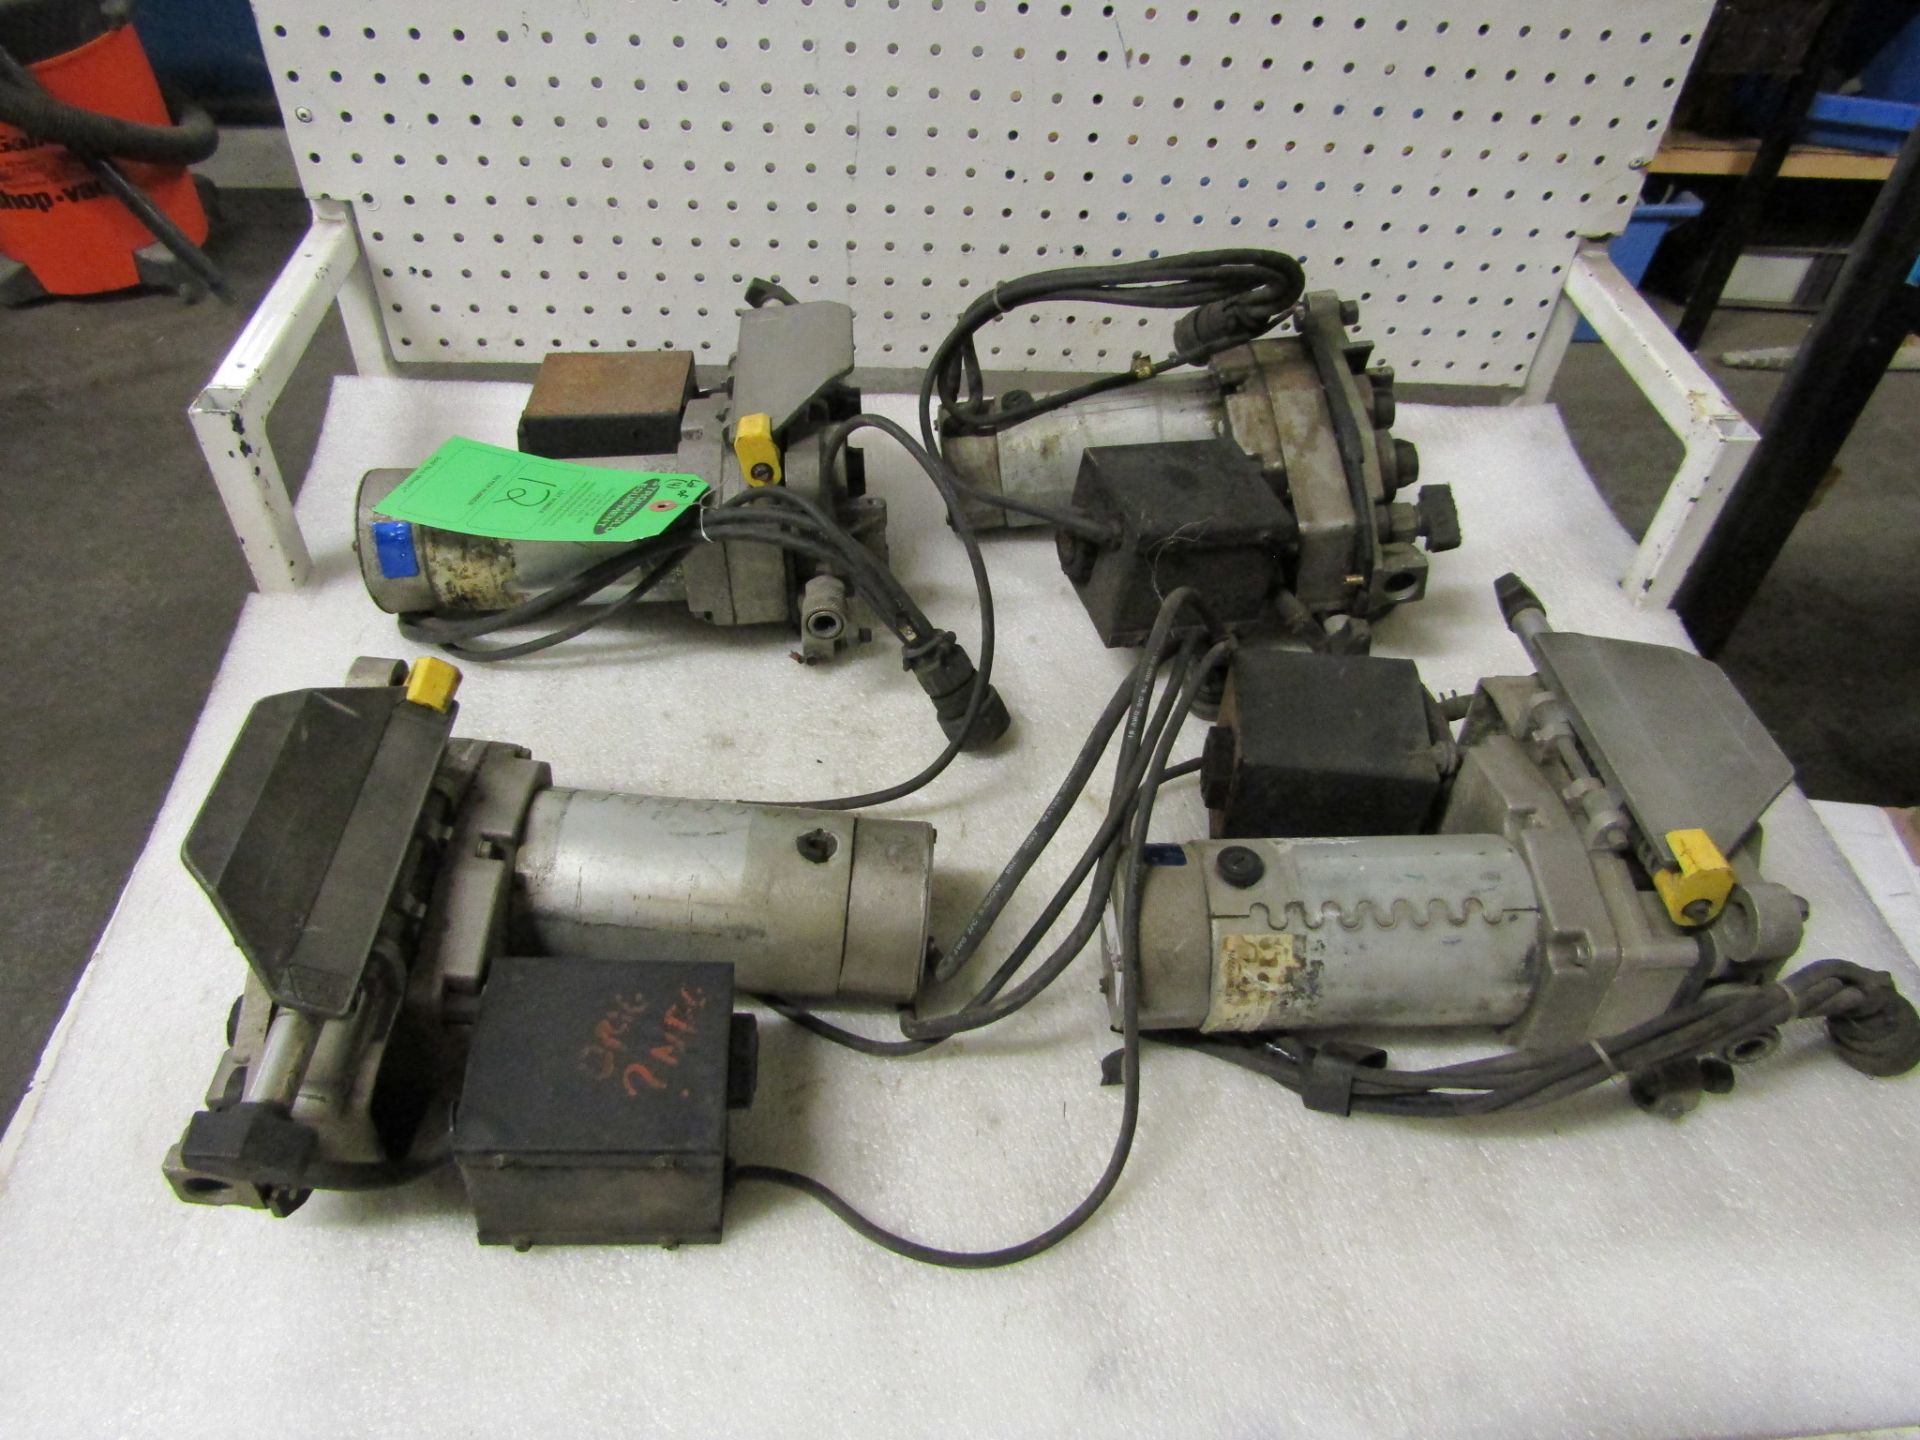 Lot of 4 (4 units) Miller 4-wheel wire feeder units